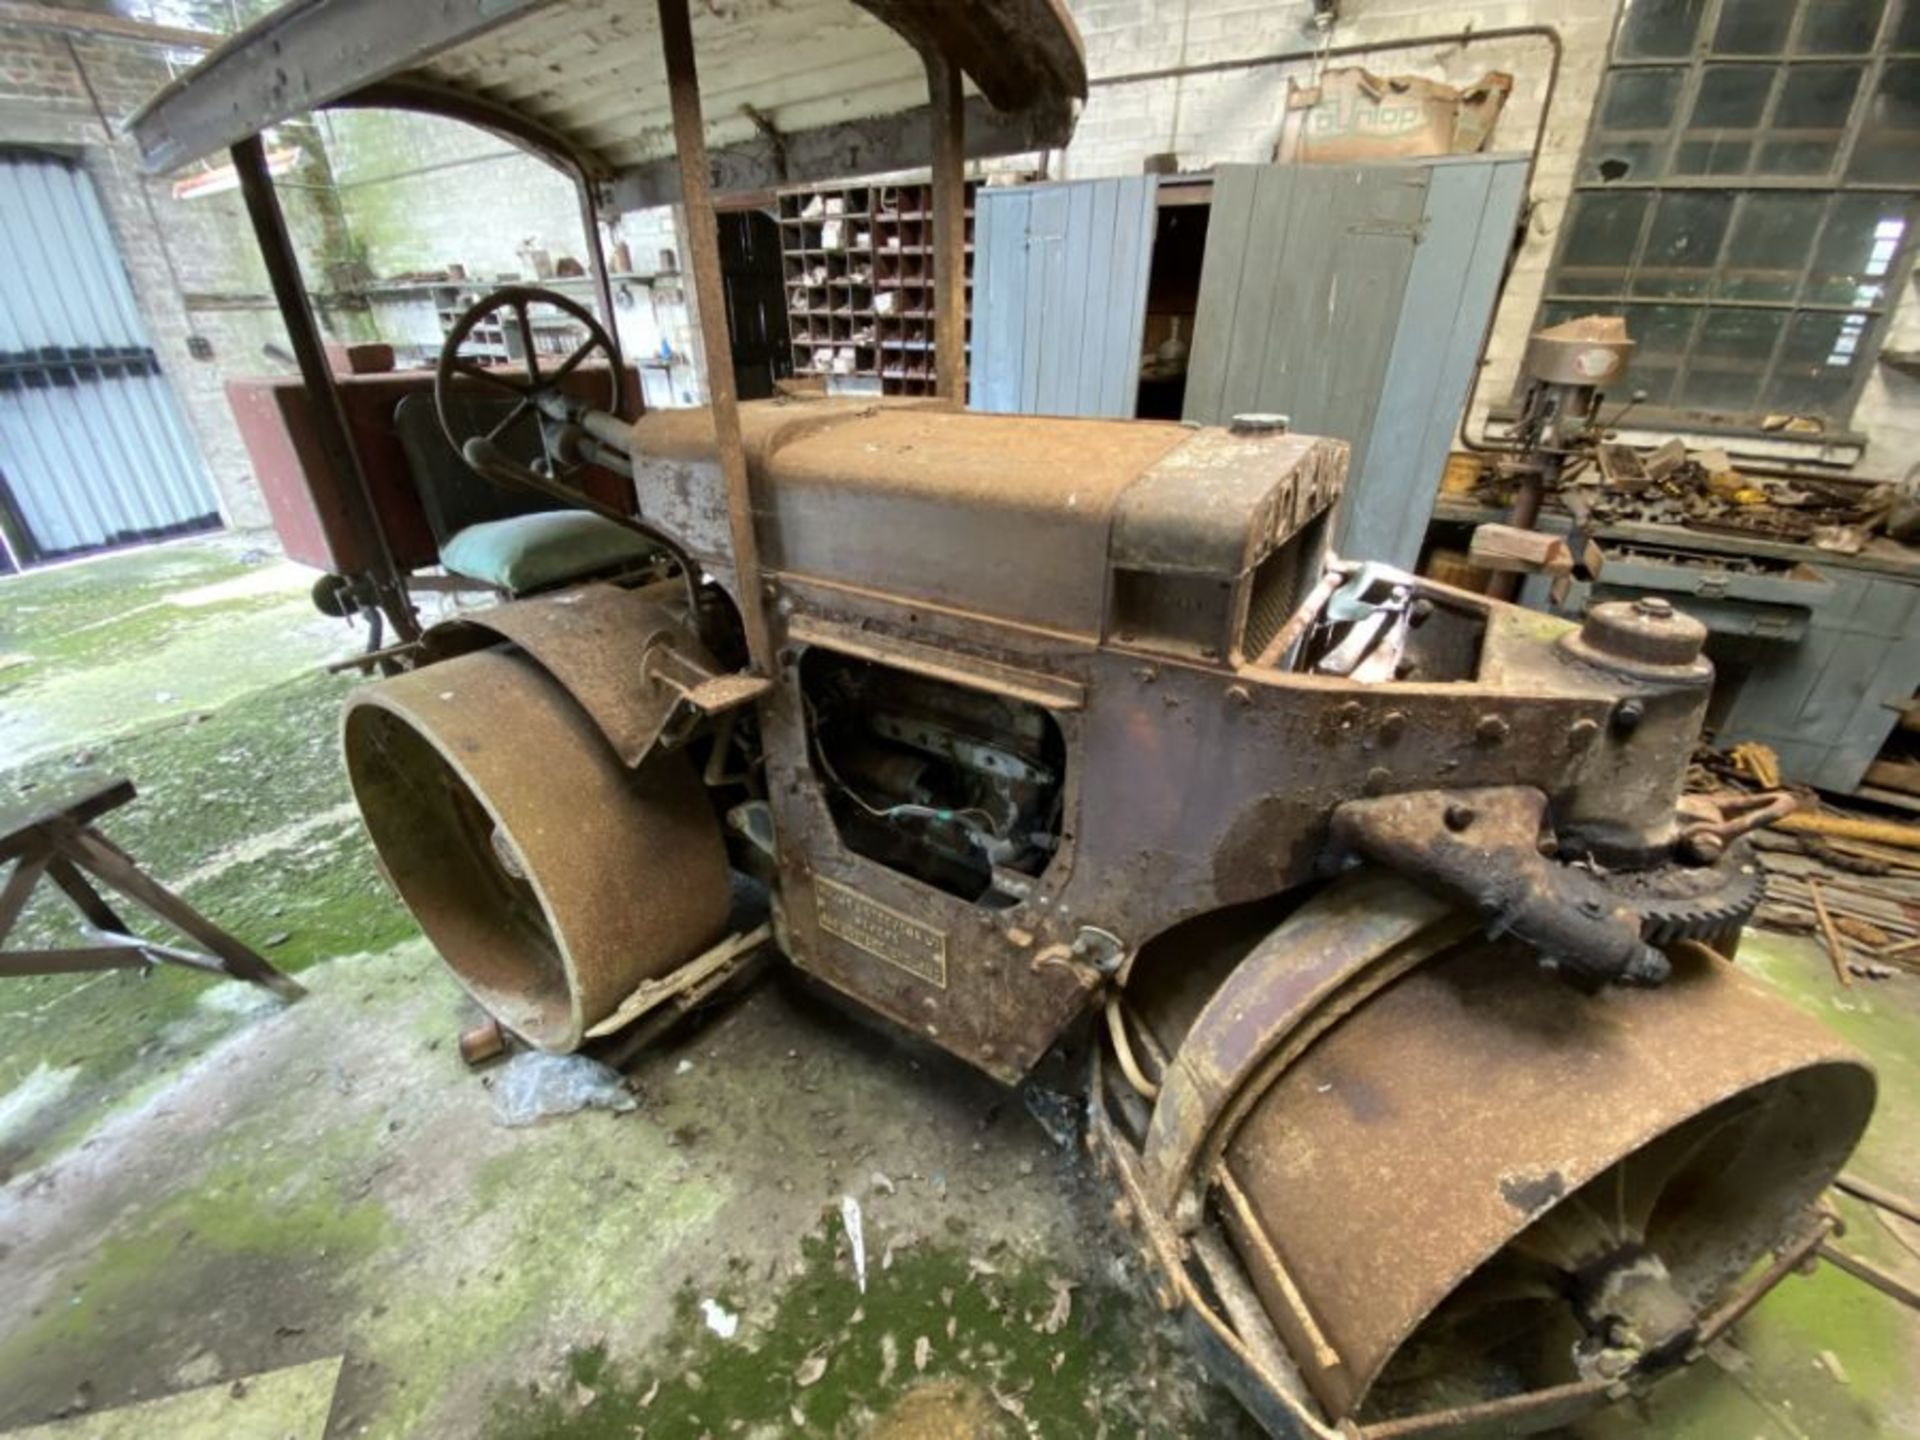 Wallis and Steevens Advance road roller - a true barn find! Has been stored in an old workshop - Image 3 of 3